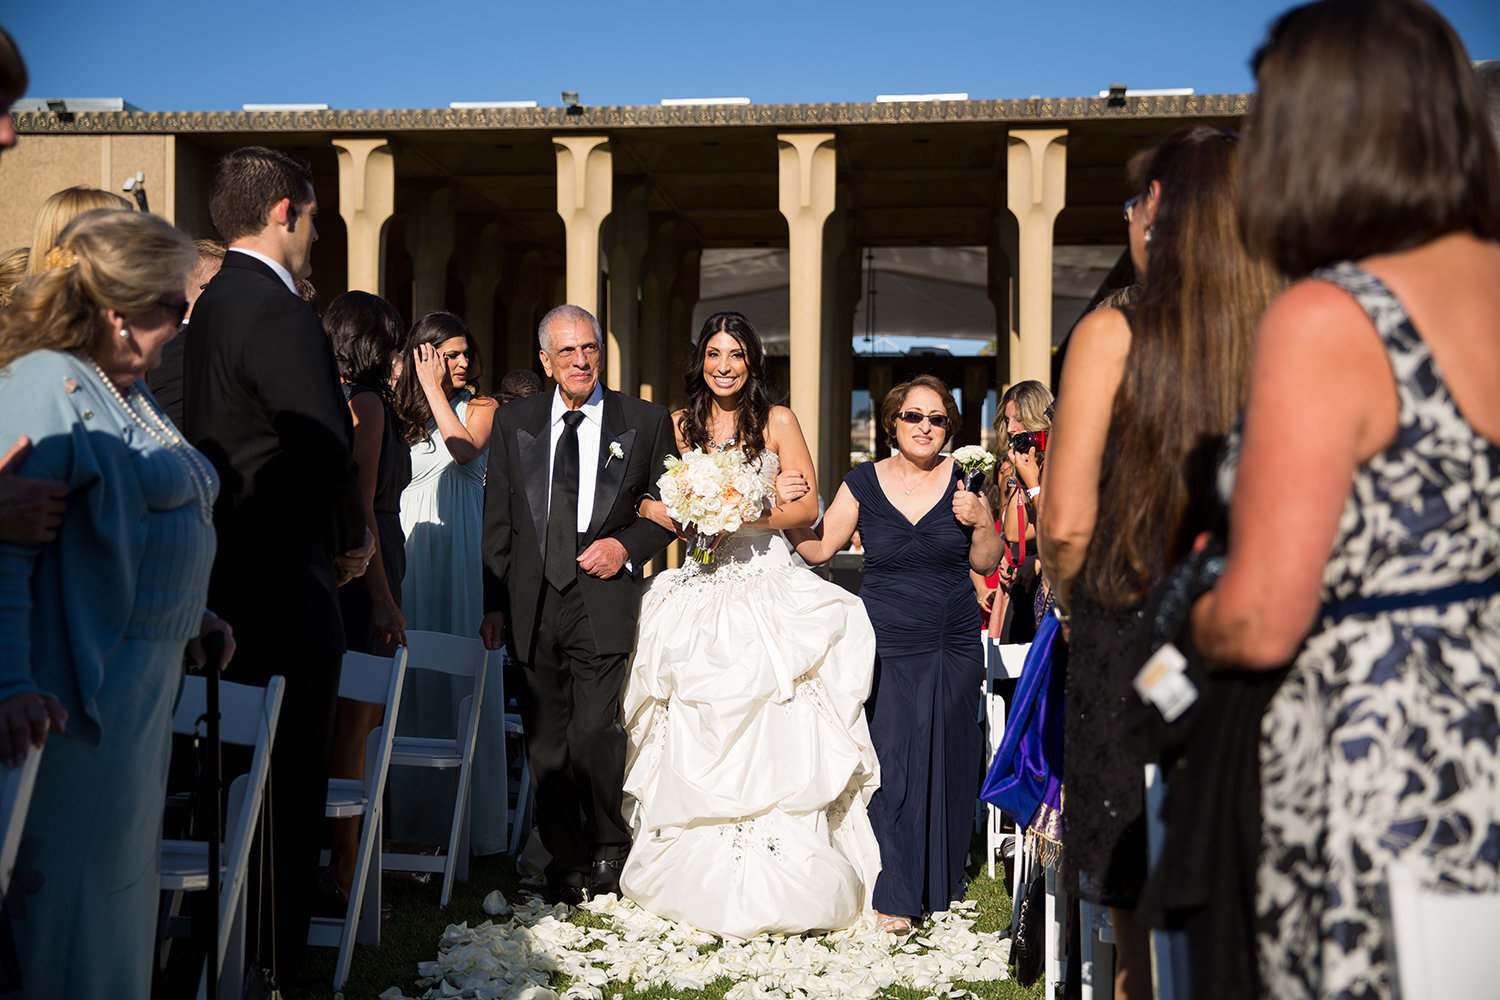 A beautiful Persian bride makes her way down the aisle with her parents